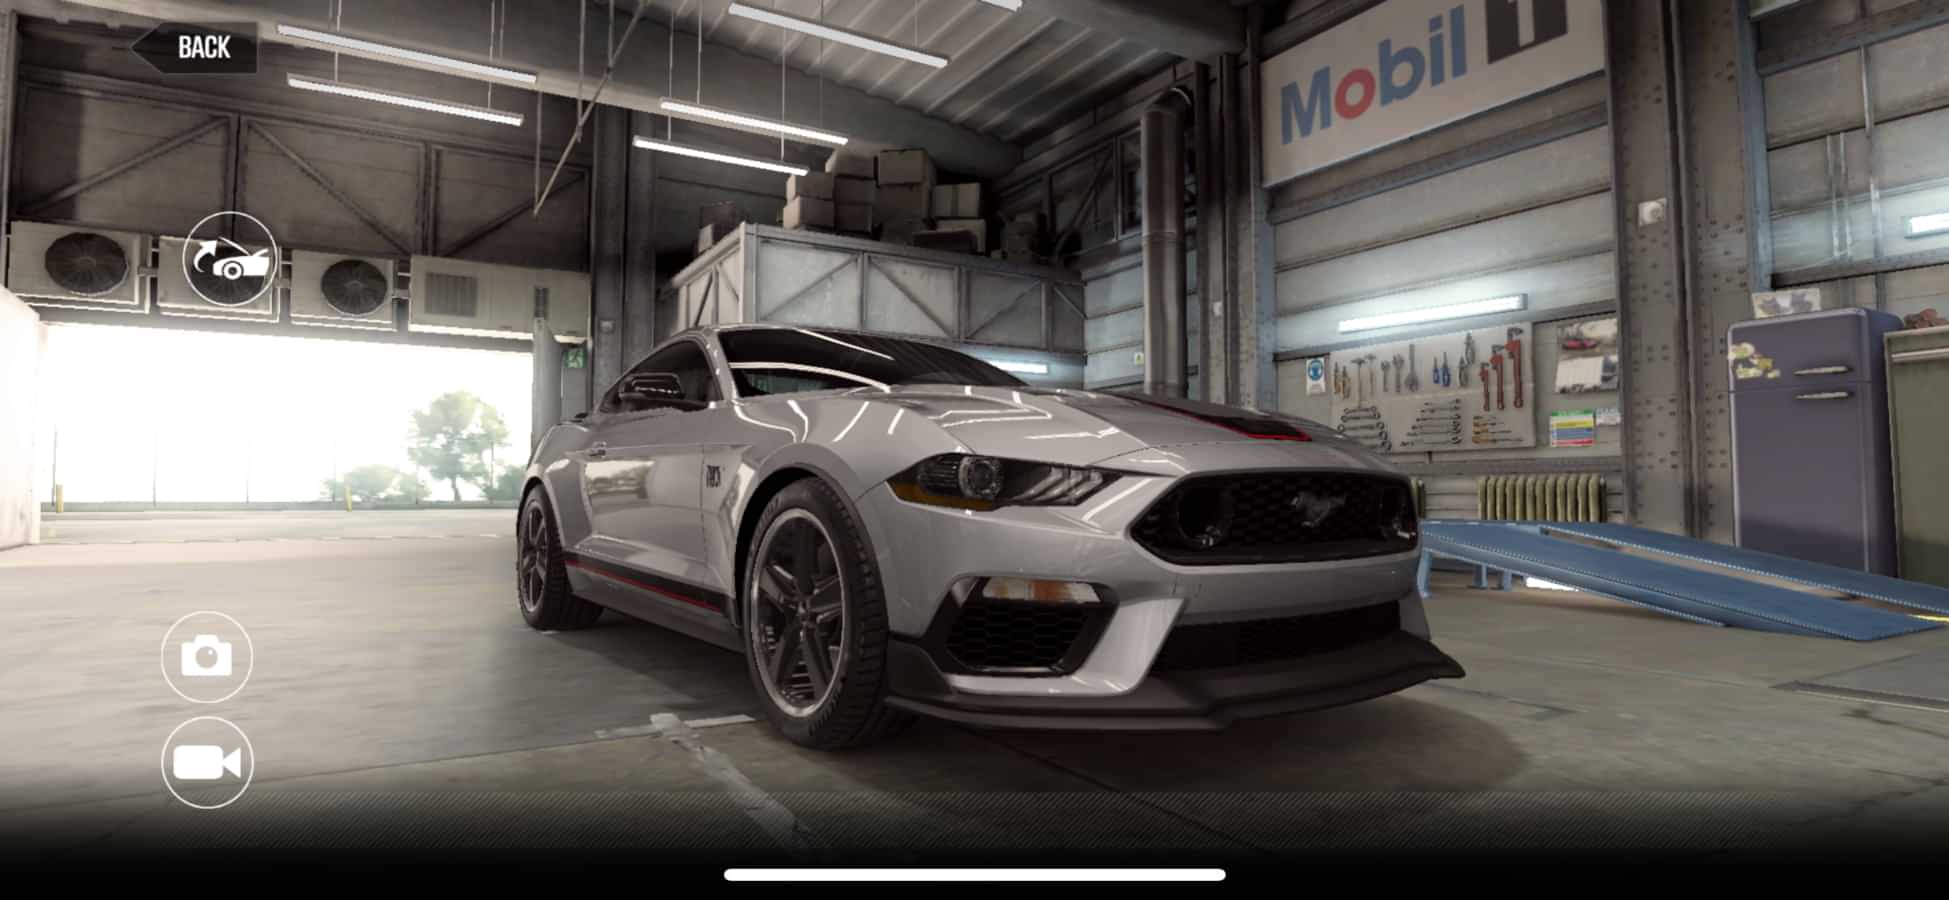 2021 Ford Mustang Mach 1 CSR2, best tune and shift pattern